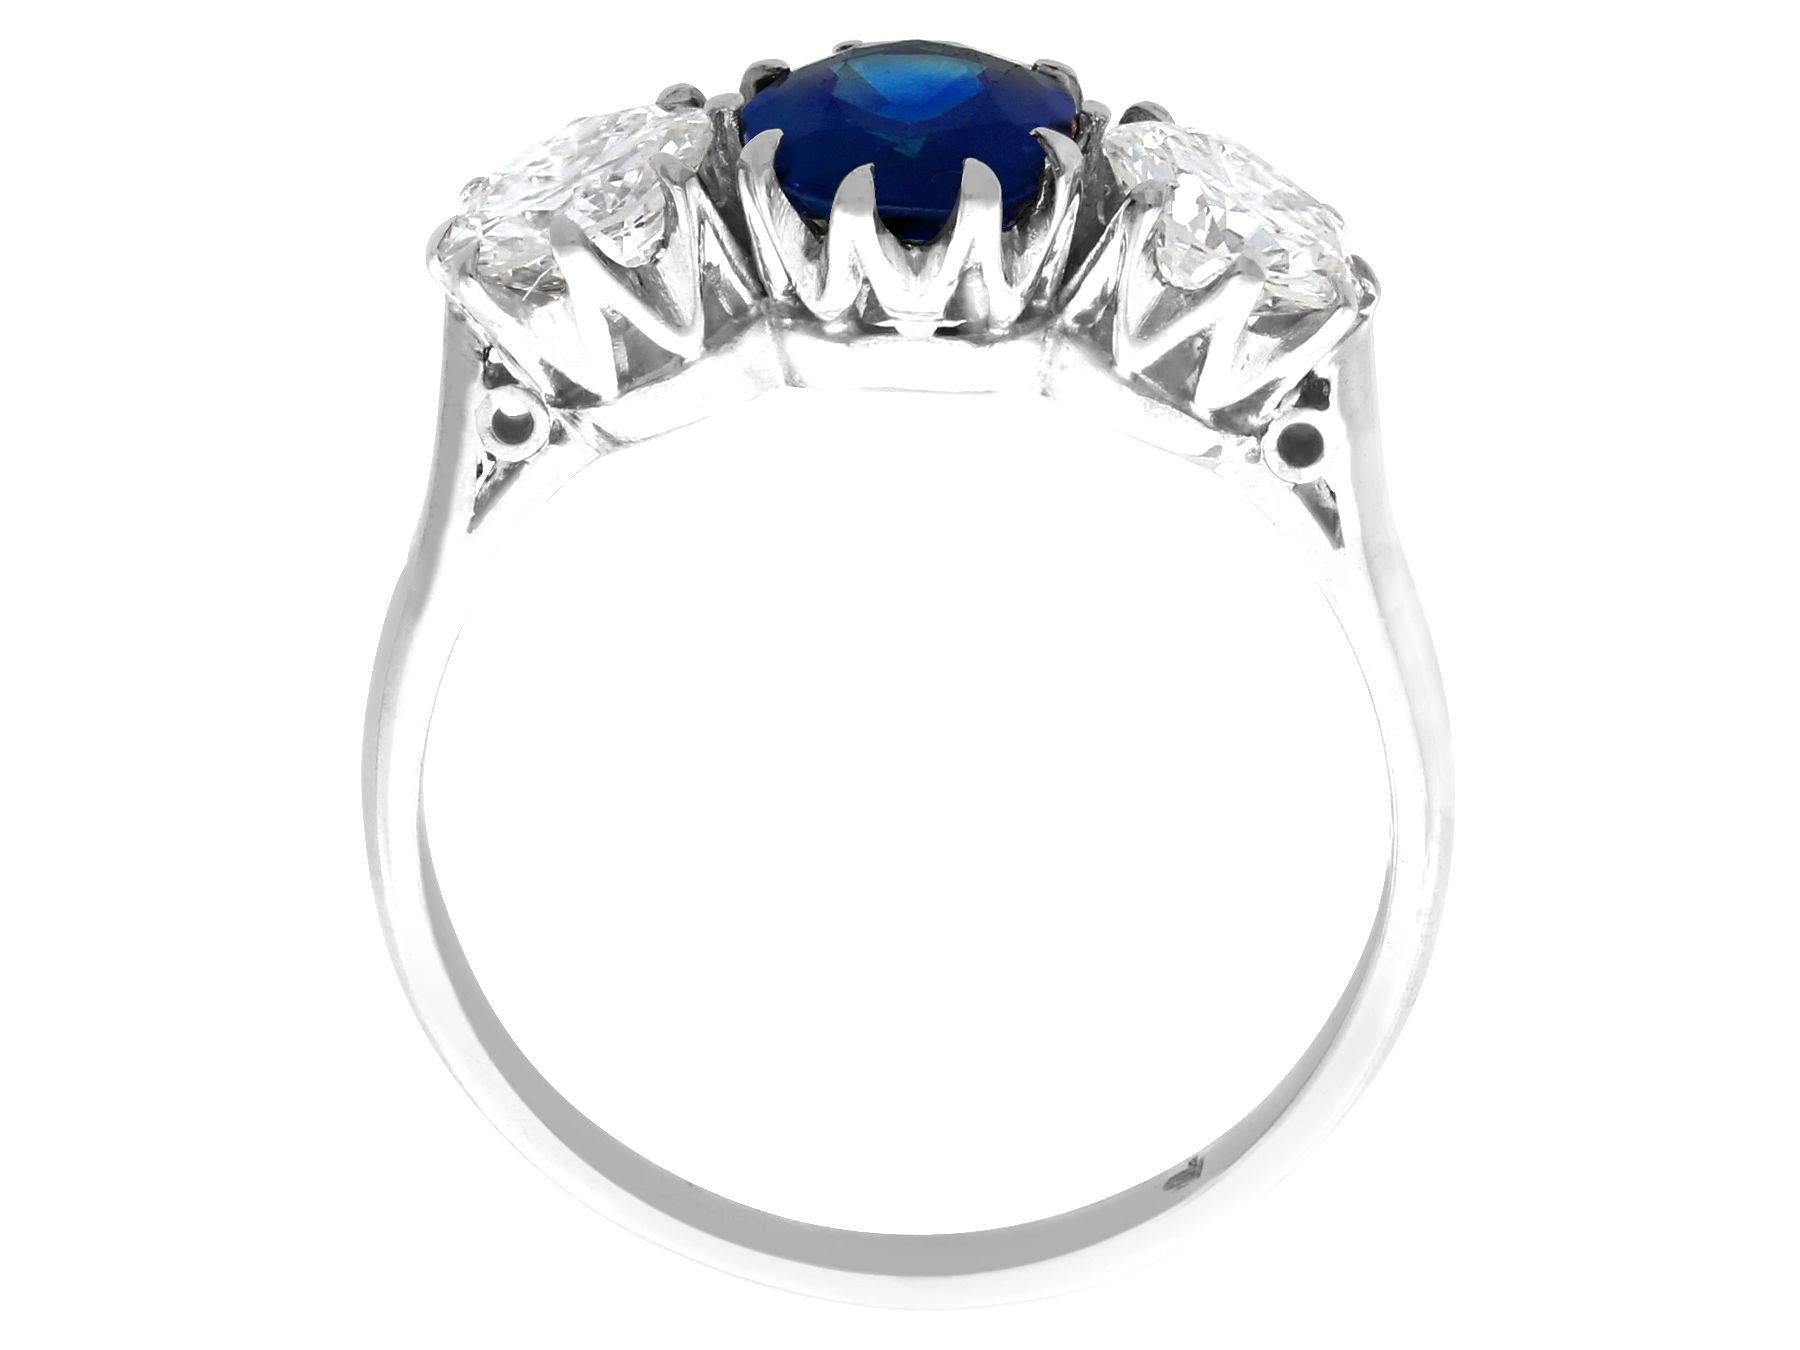 Oval Cut Antique 1.80 Carat Sapphire and 1.35 Carat Diamond White Gold Trilogy Ring For Sale